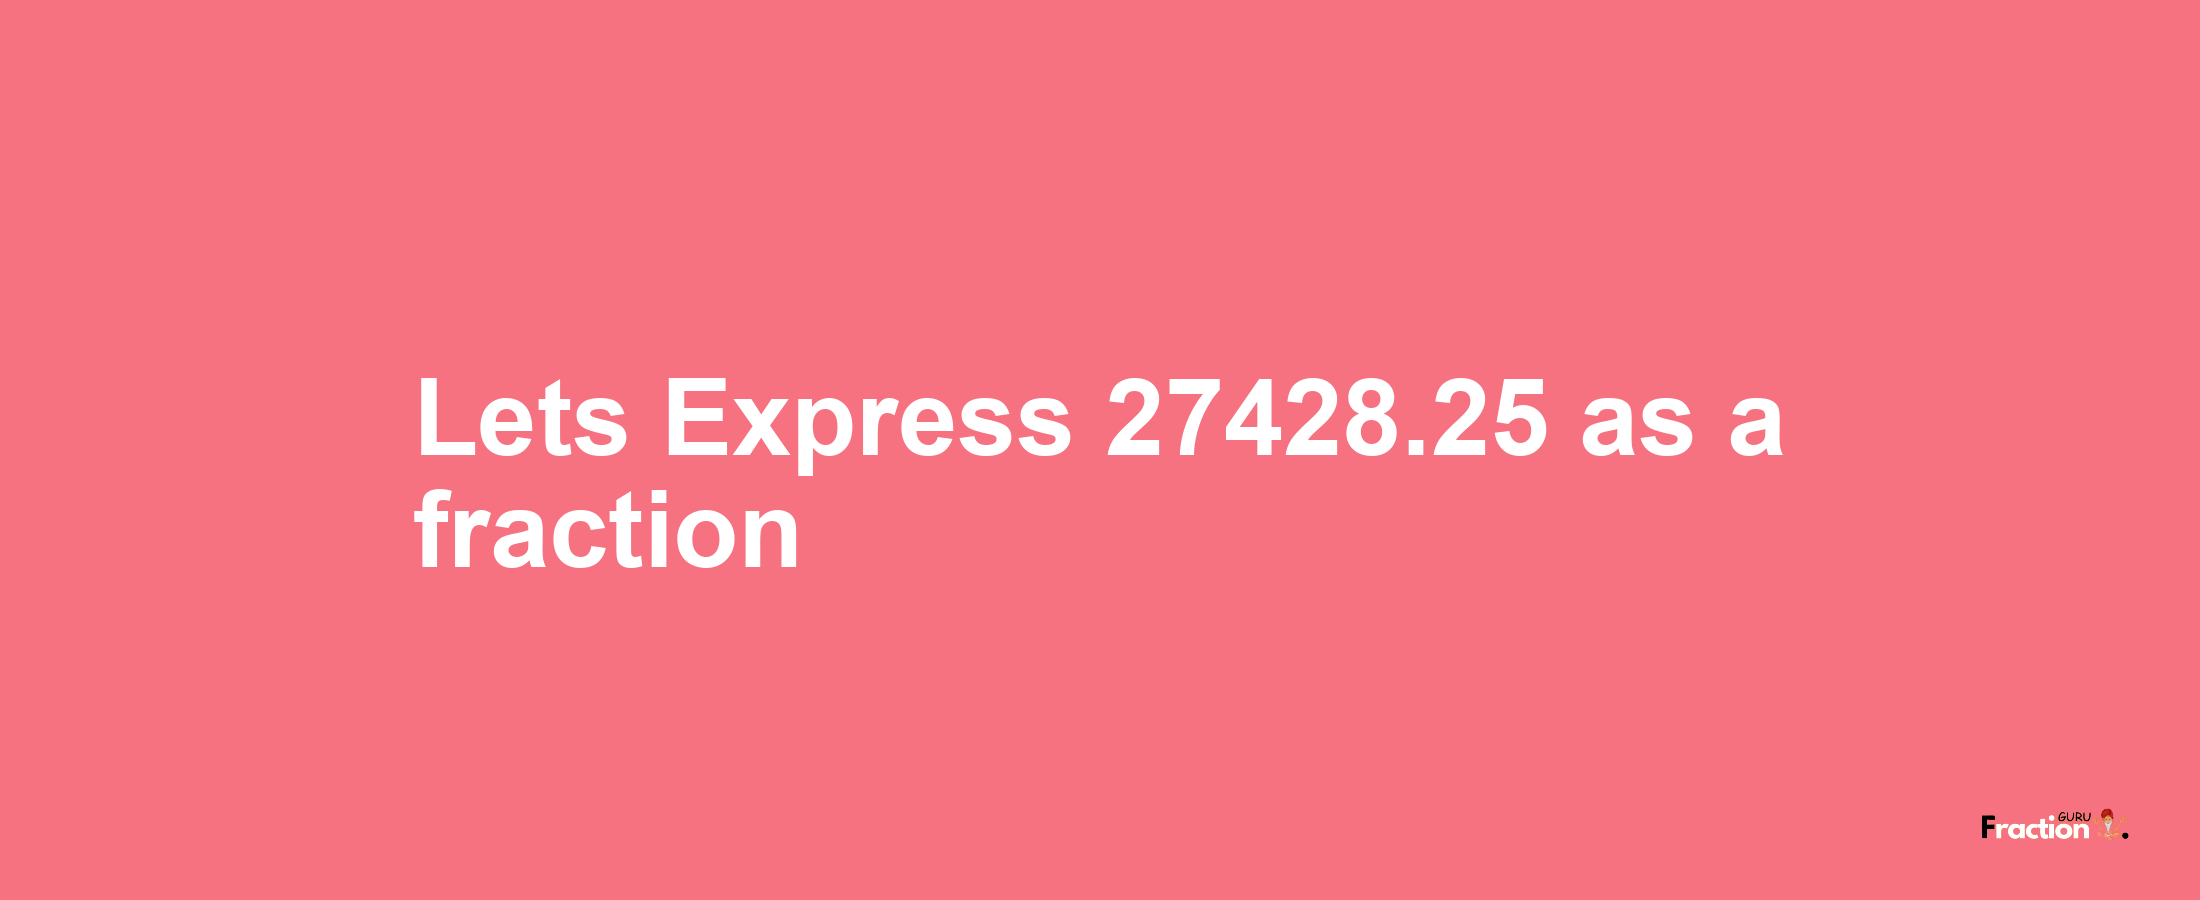 Lets Express 27428.25 as afraction